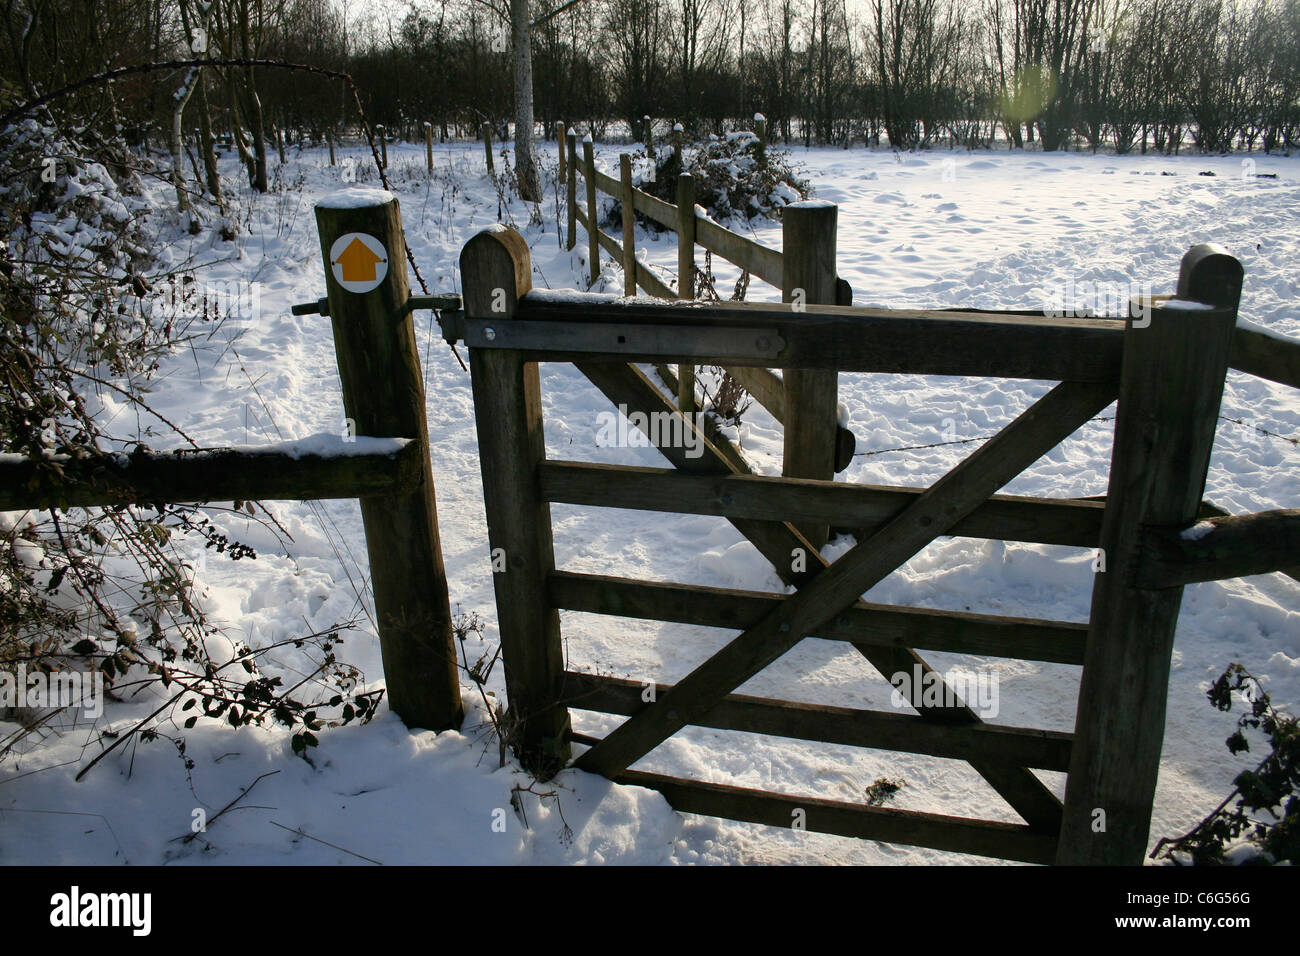 Closed gate leading to a snowy field, Witney, Oxfordshire, England Stock Photo